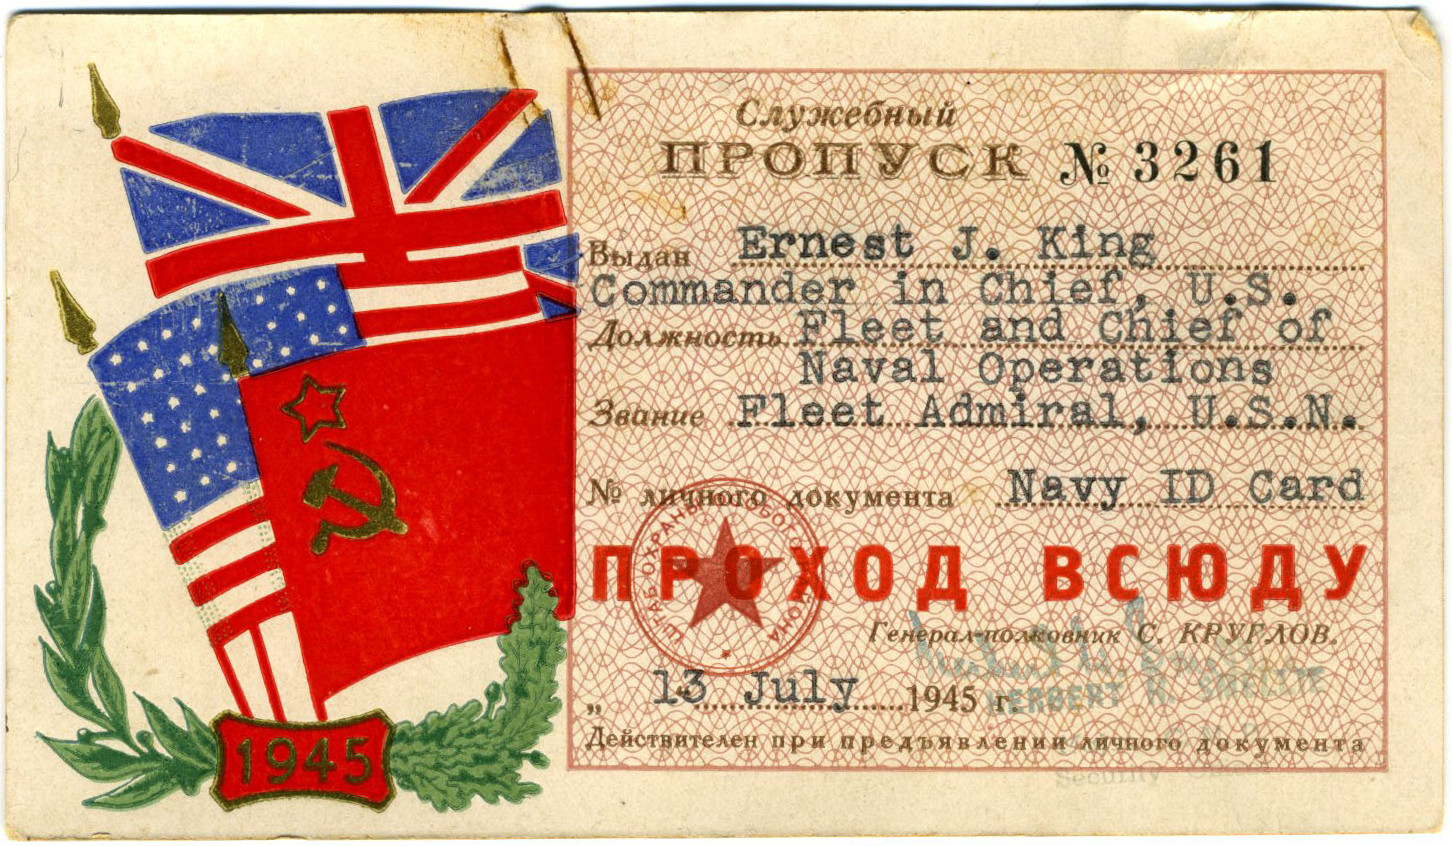 Ernest King's Soviet-issued identification card for use at the Potsdam Conference in Germany, issued 13 Jul 1945